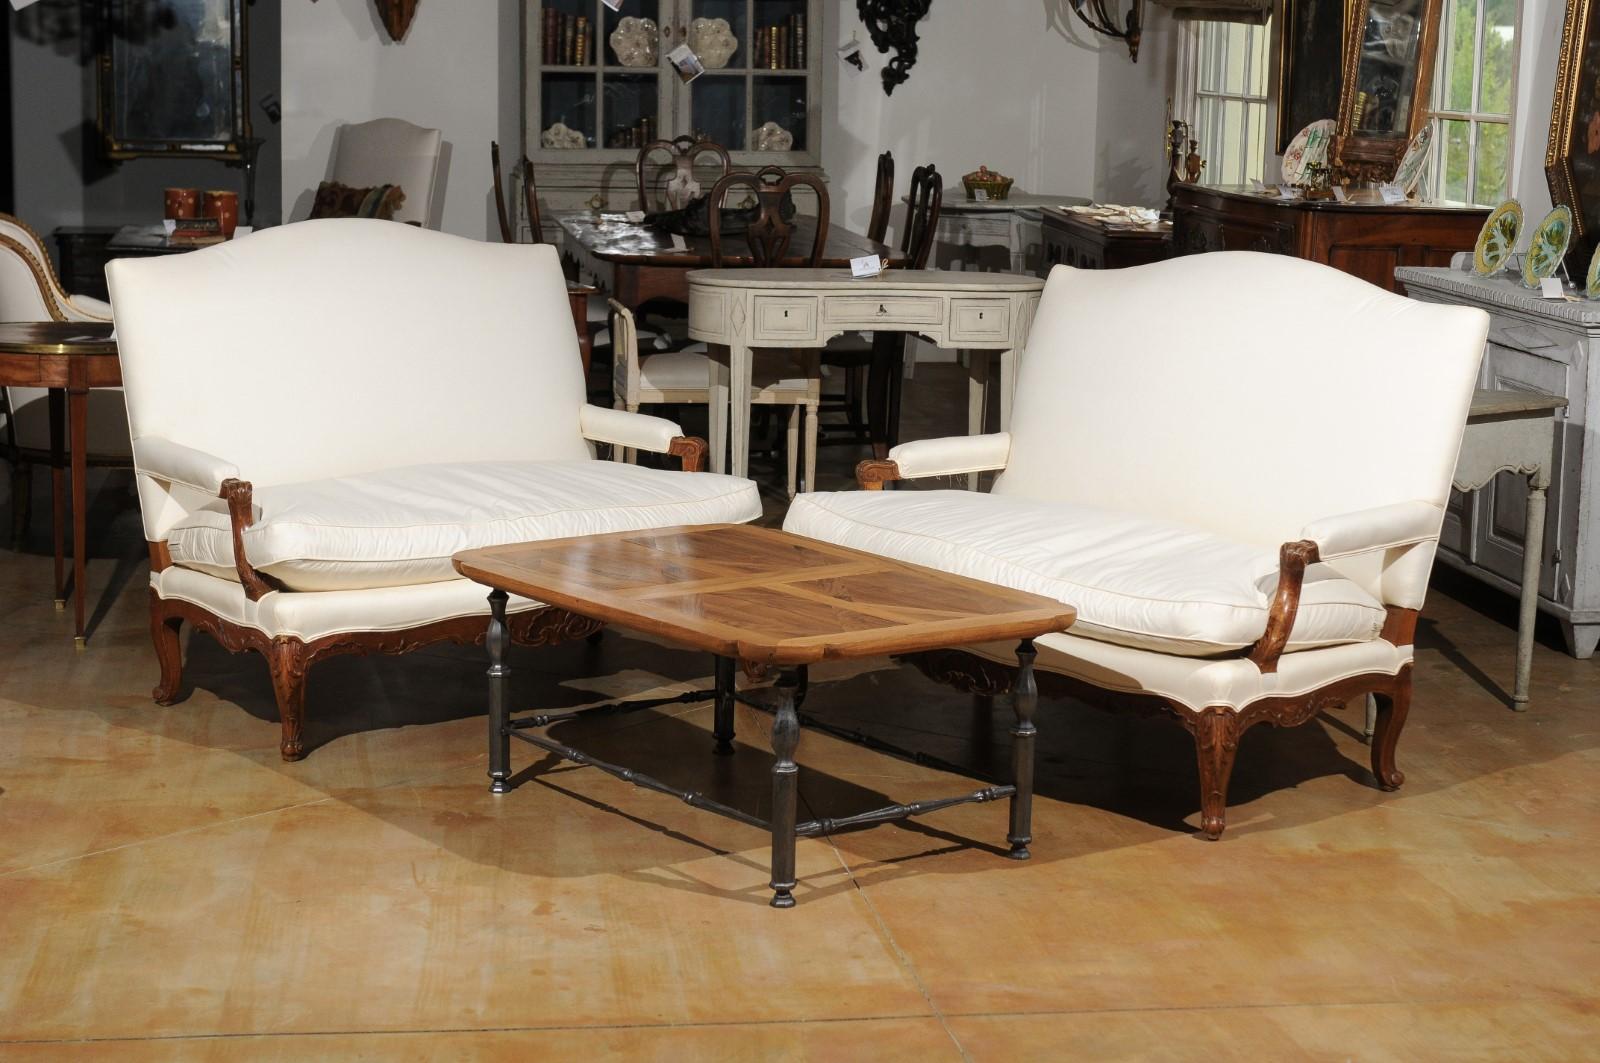 A pair of French Régence style wooden canapés from the 19th century, with cabriole legs, acanthus leaves and new upholstery. Born in France during the politically dynamic 19th century, each of this pair of sofas features a slanted camelback,